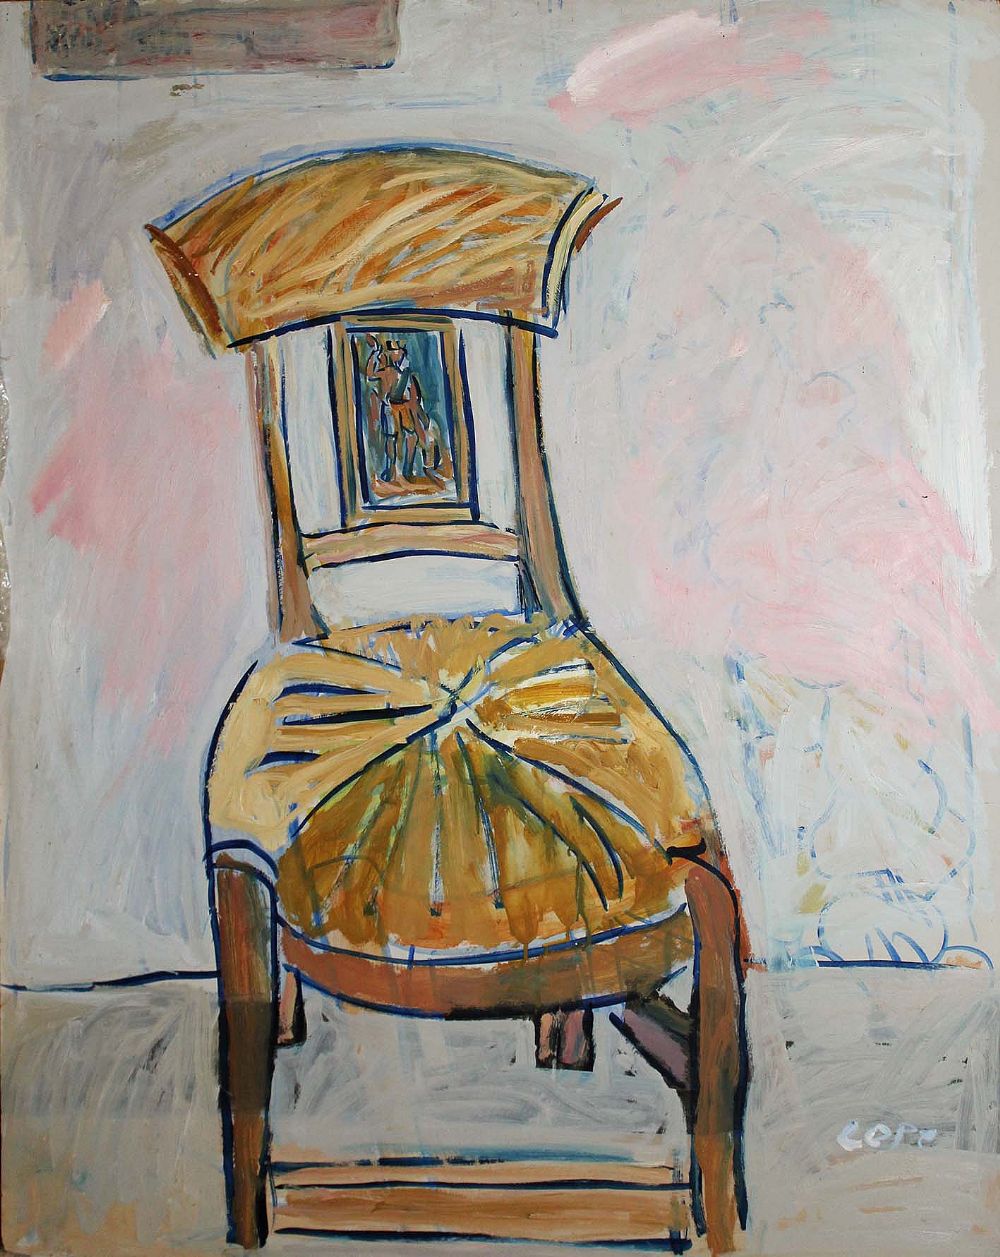 CHAIR by Elizabeth Cope sold for €1,000 at deVeres Auctions